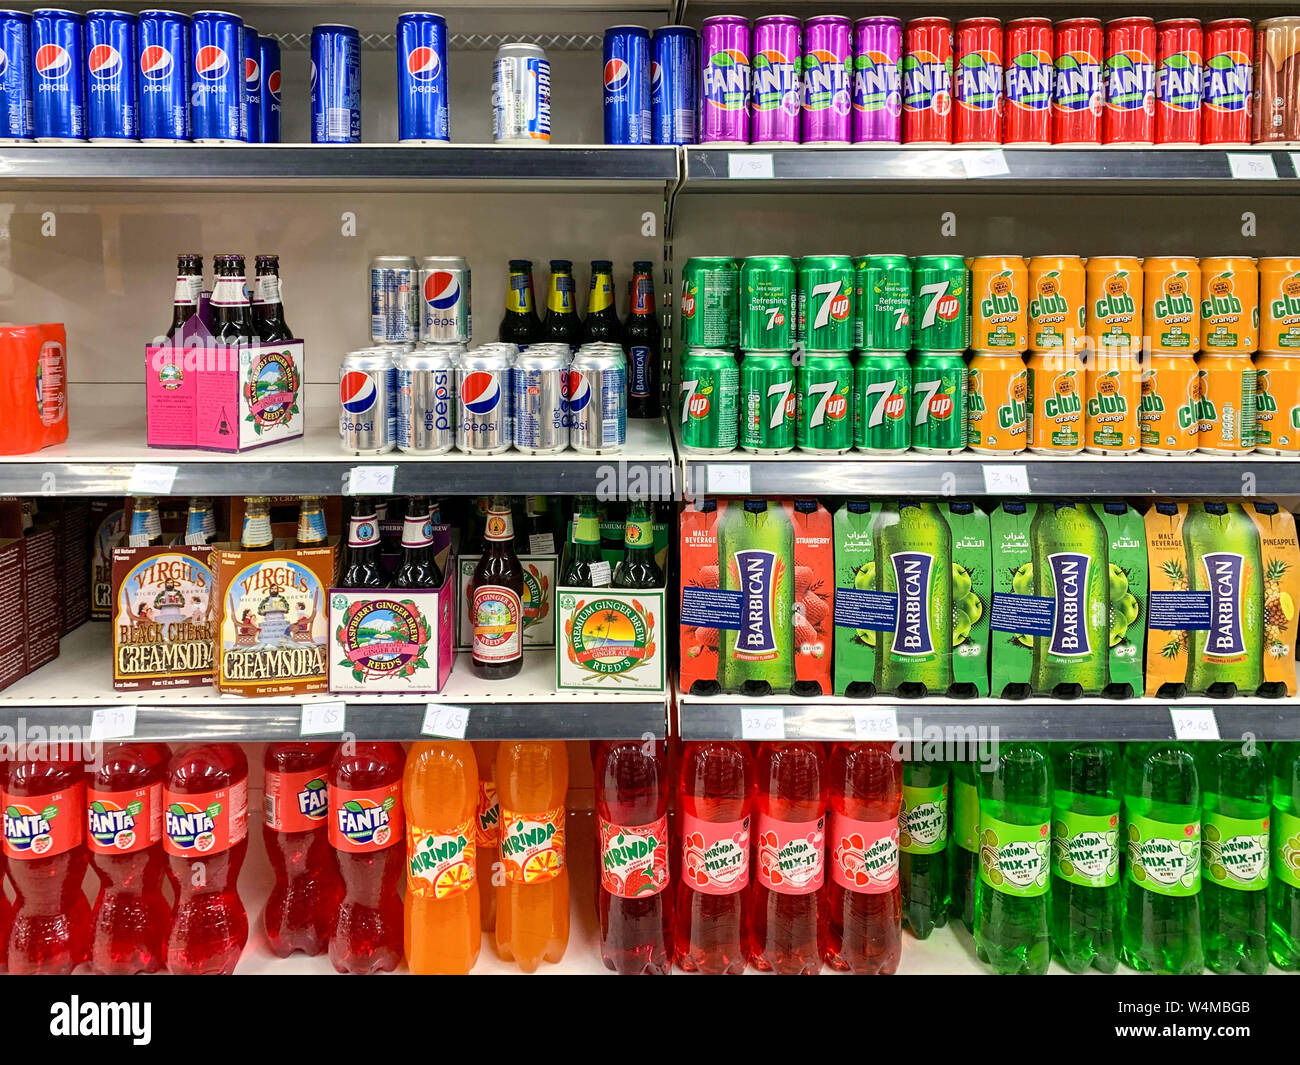 Kuala Lumpur, Malaysia - July 21, 2019: Various type of bottled drinks and juices on display at the shelves of Cold Storage supermarket. Illustrative Stock Photo